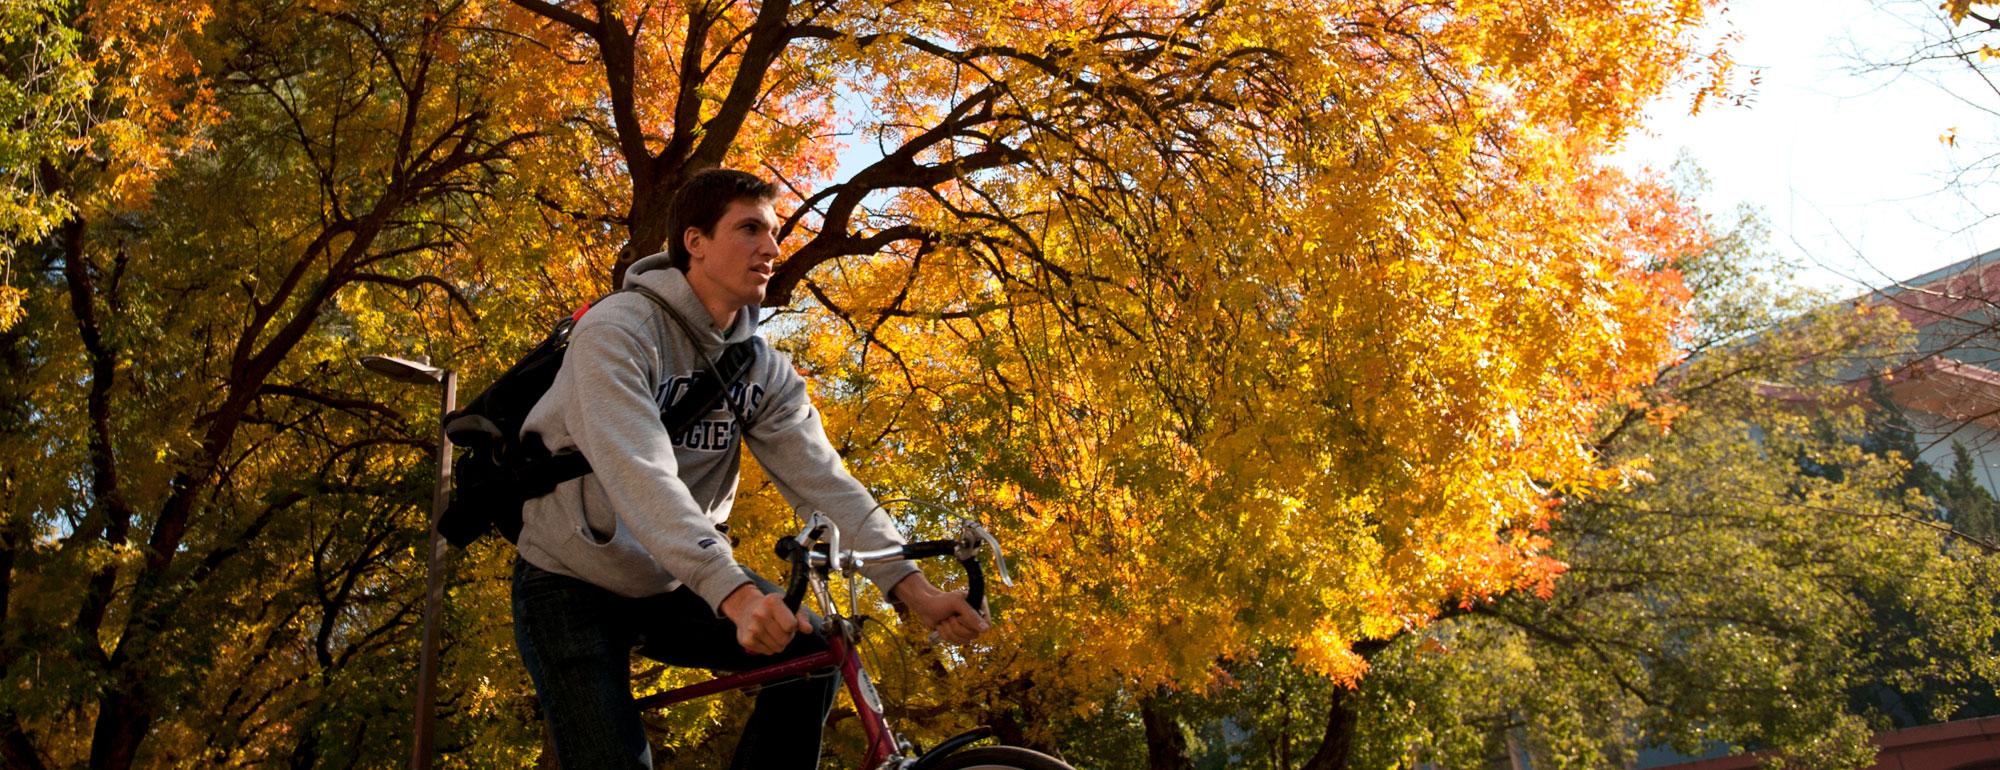 A male student rides his bicycle under the Fall foliage on the ֱ campus